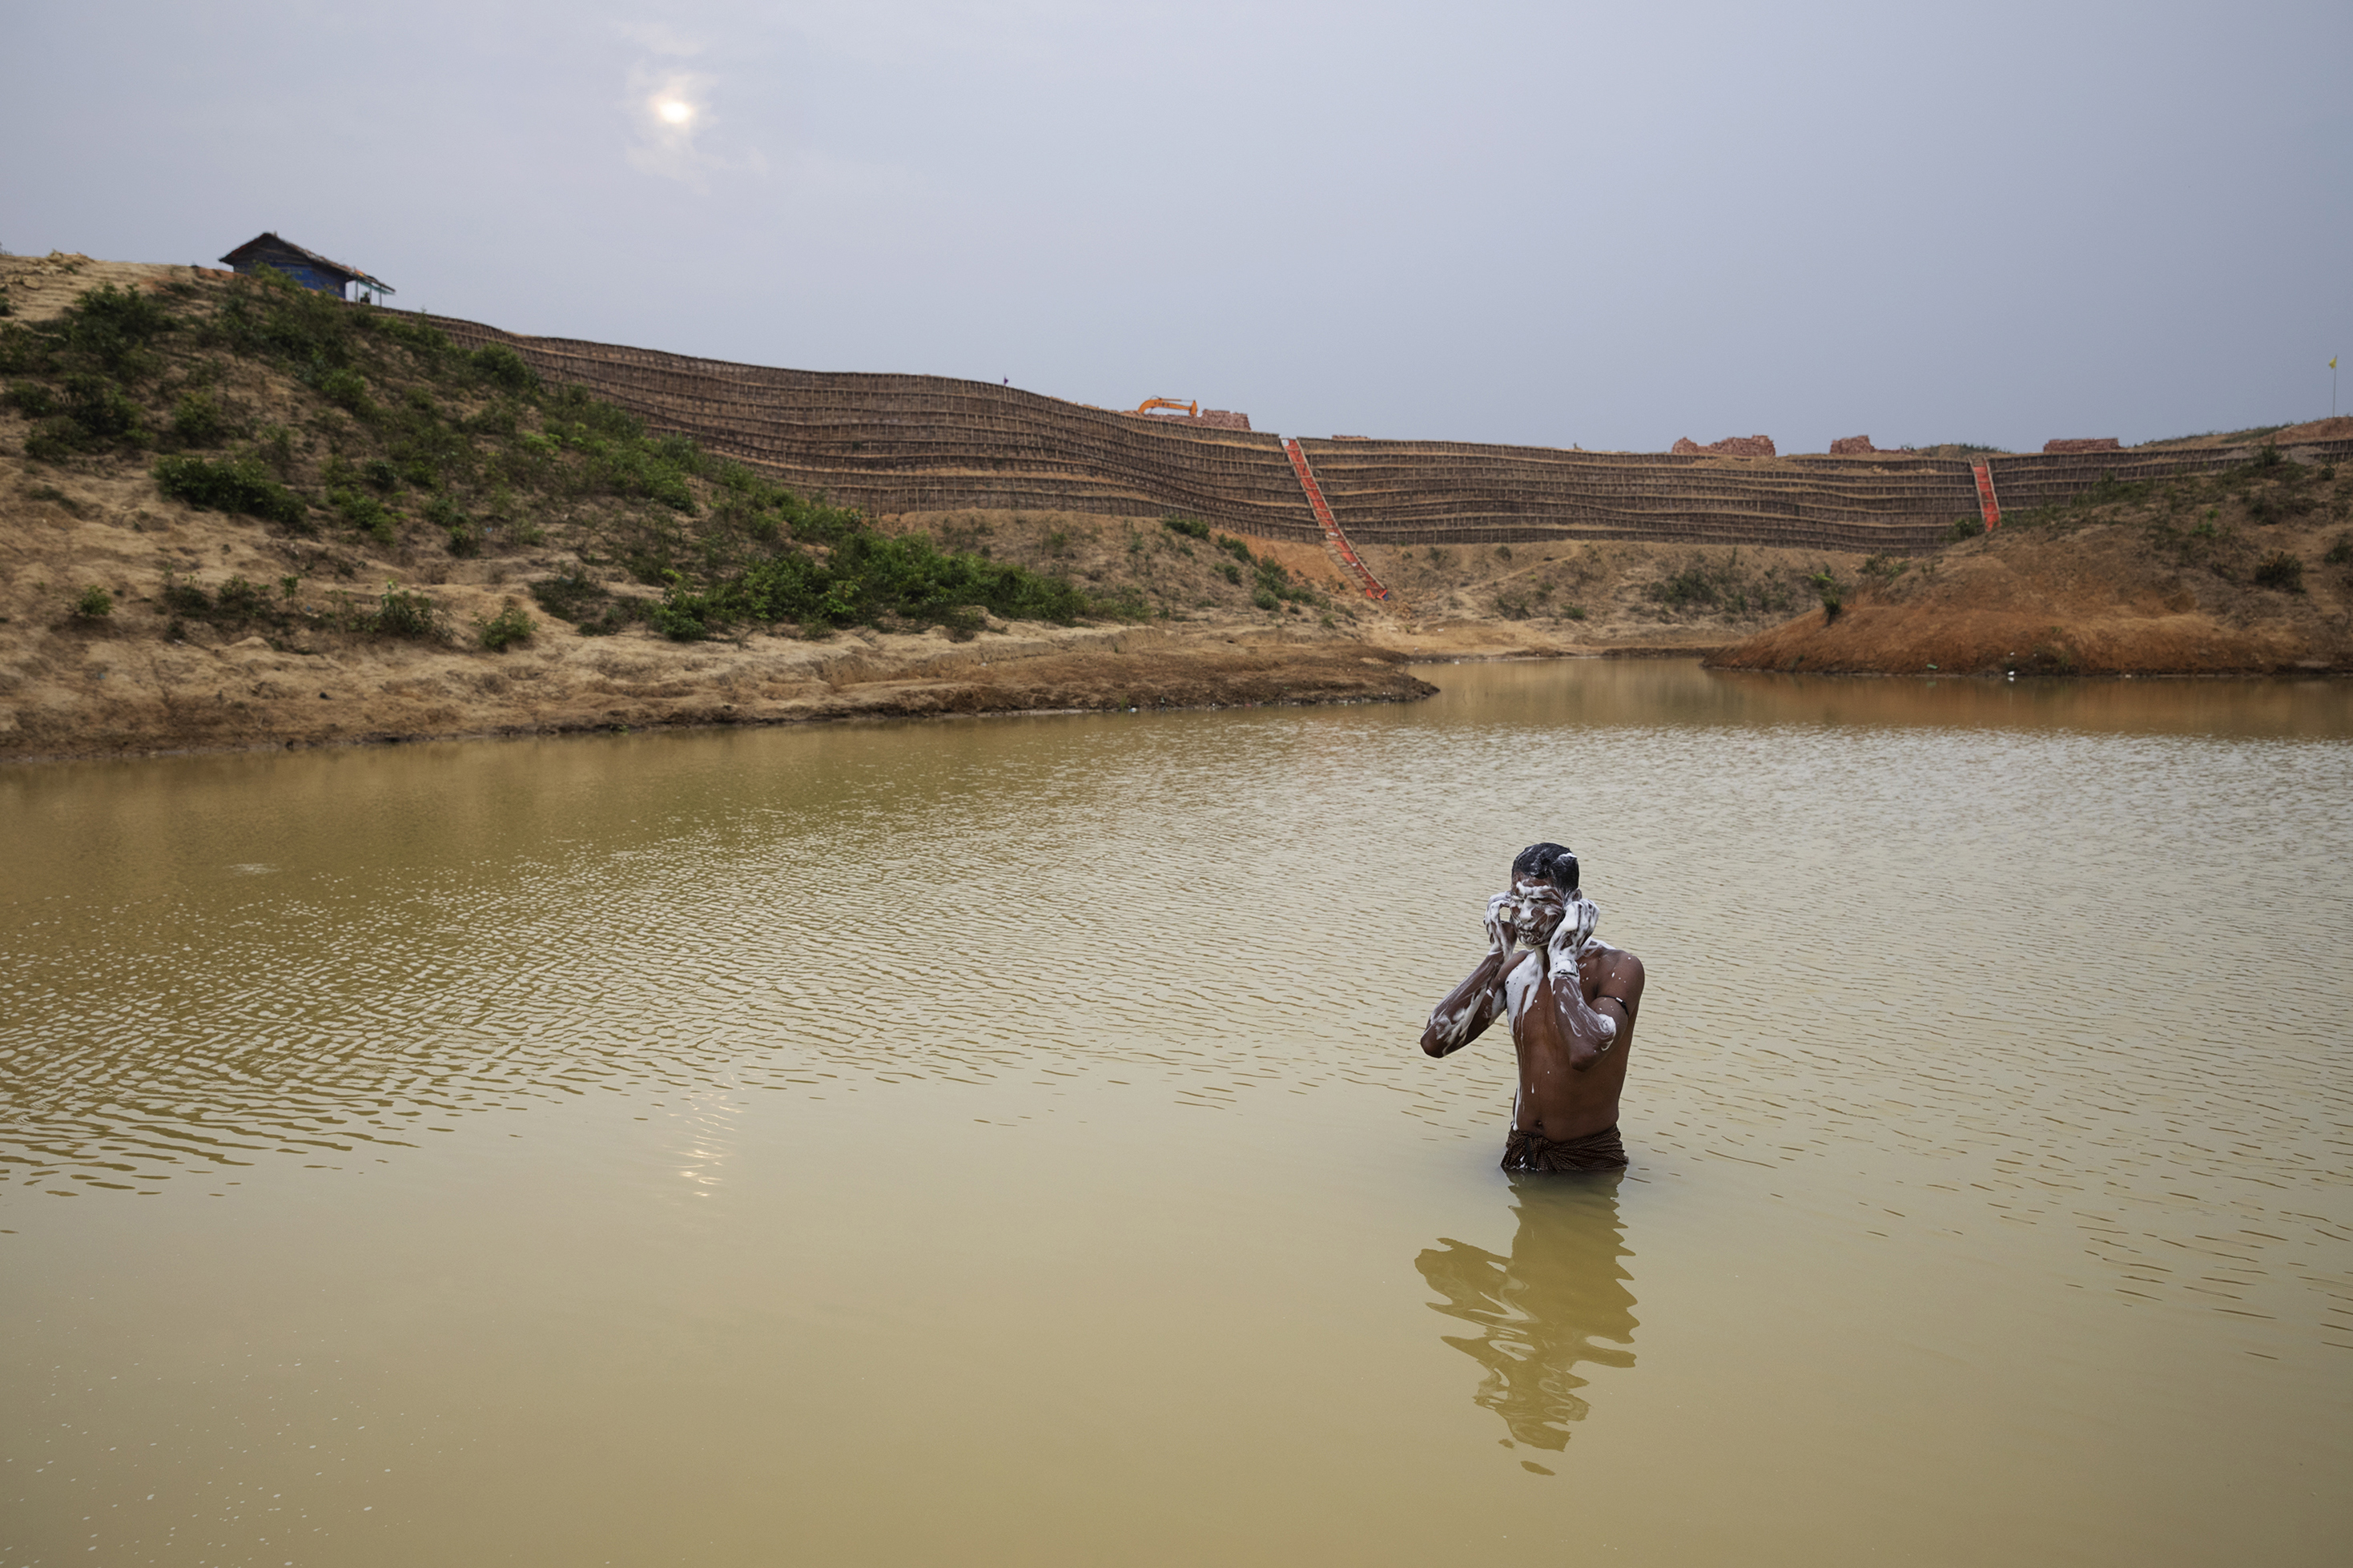 A Rohingya man bathes in a man-made pond near the camp where he lives. Behind him is the construction of the Camp 20 Extension. (James Nachtwey for TIME)